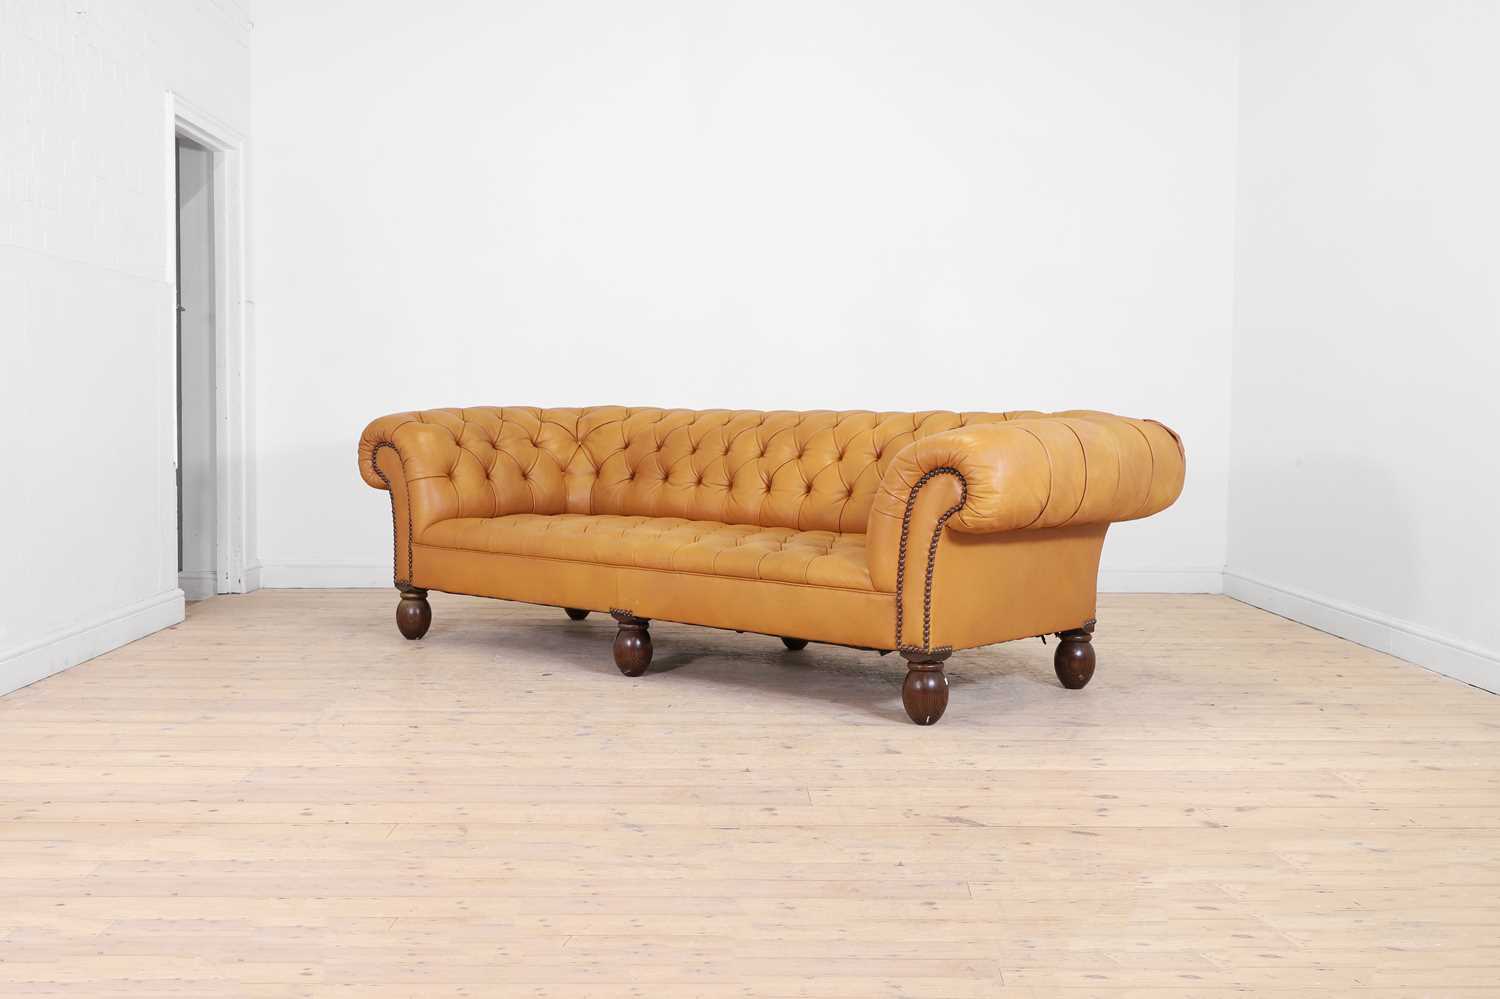 A chesterfield sofa by George Smith, - Image 4 of 8